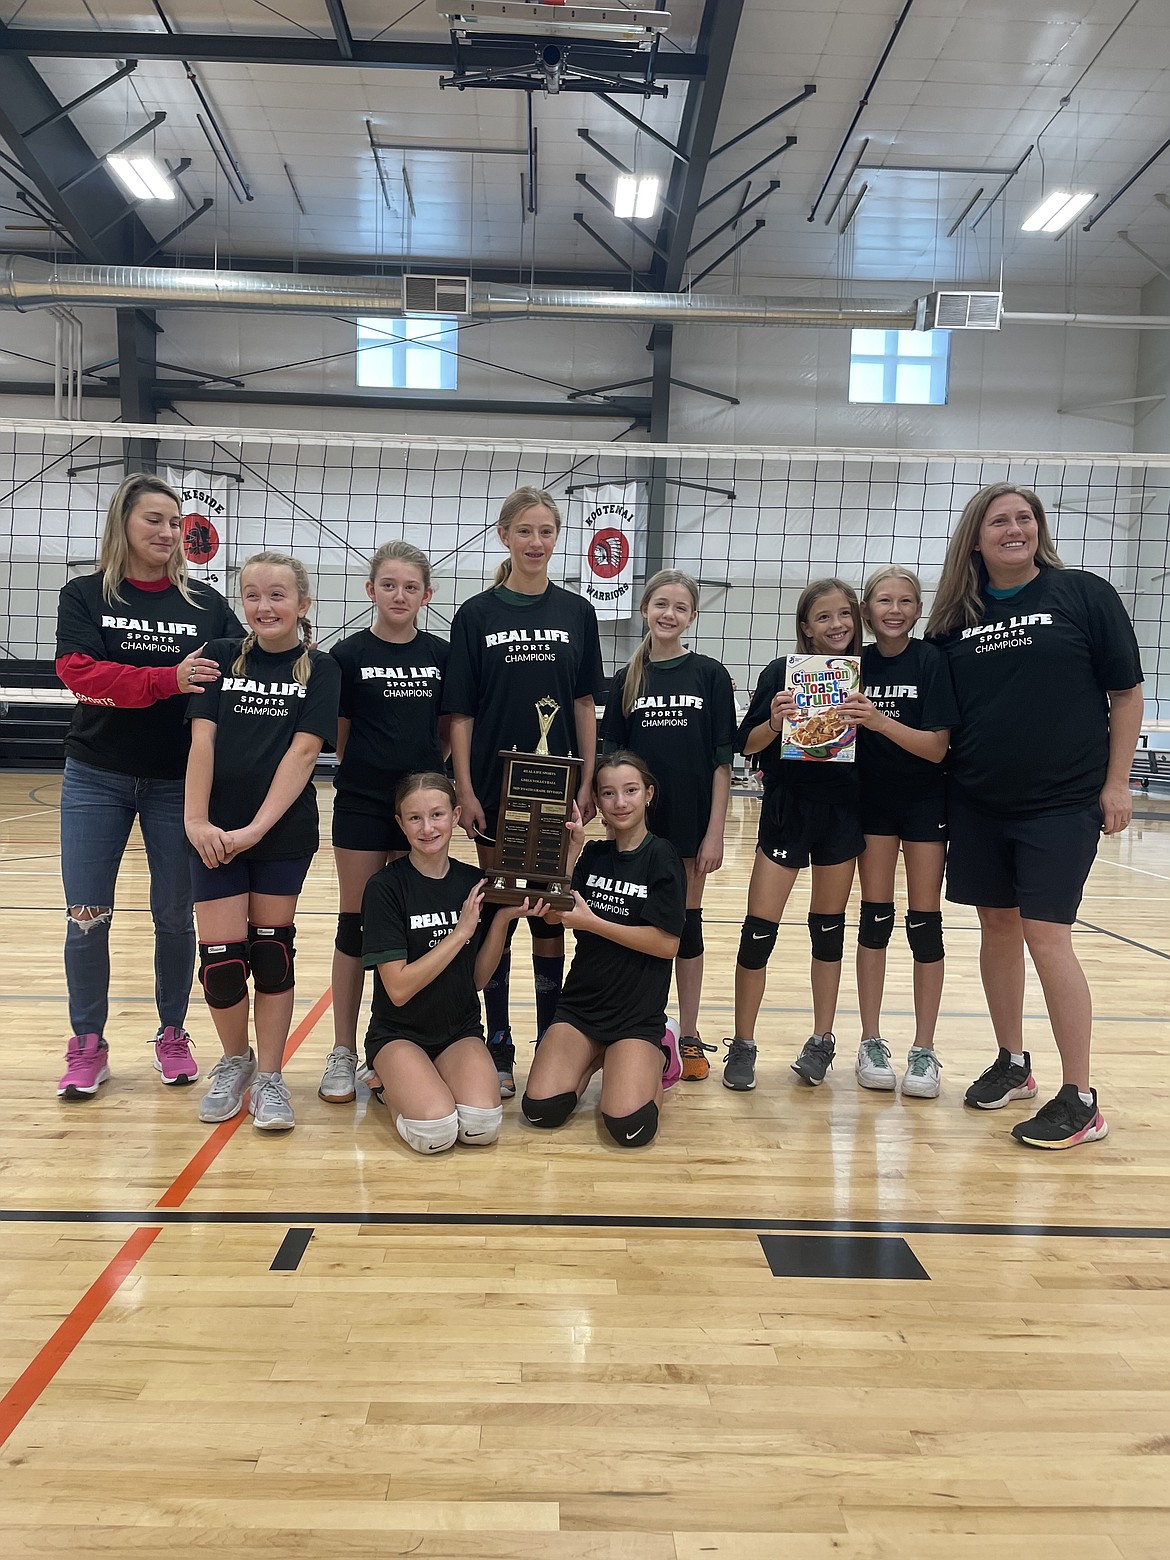 Courtesy photo
The Lucky Ladies won the 5th/6th grade volleyball championship in Real Life Sports. In the front row from left are Mckenna Wilson and Iyla Oseguera; and back row from left, assistant coach Allison Rittenour, Macy Fagan, Brynley Hilliard, Millie Cushman, Sarah Mueller, Bella Link, Ella Divine and coach Melissa Divine.